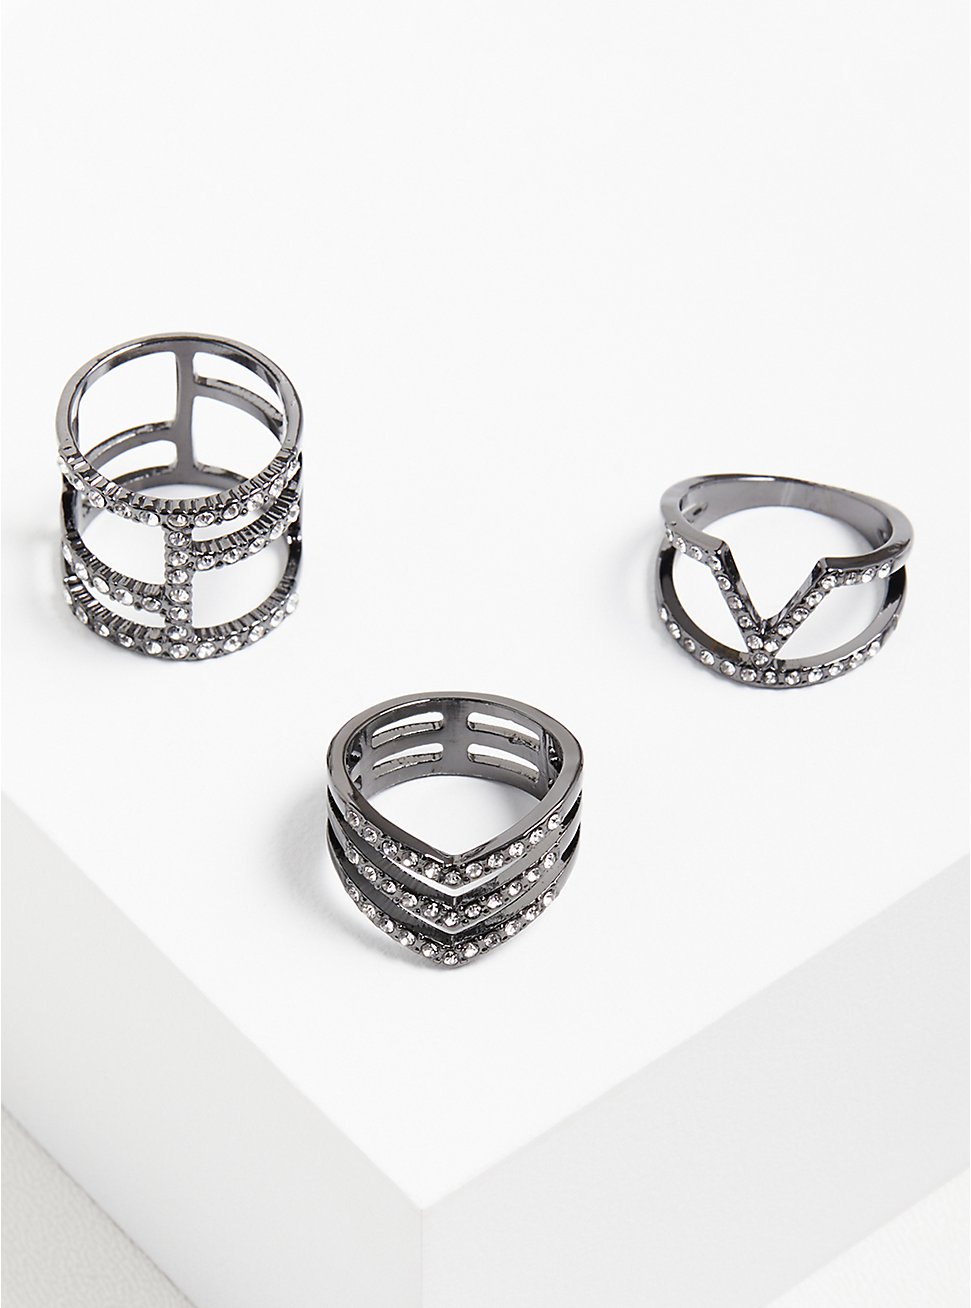 Plus Size Statement Rings - Hematite Tone Pave, SILVER, hi-res